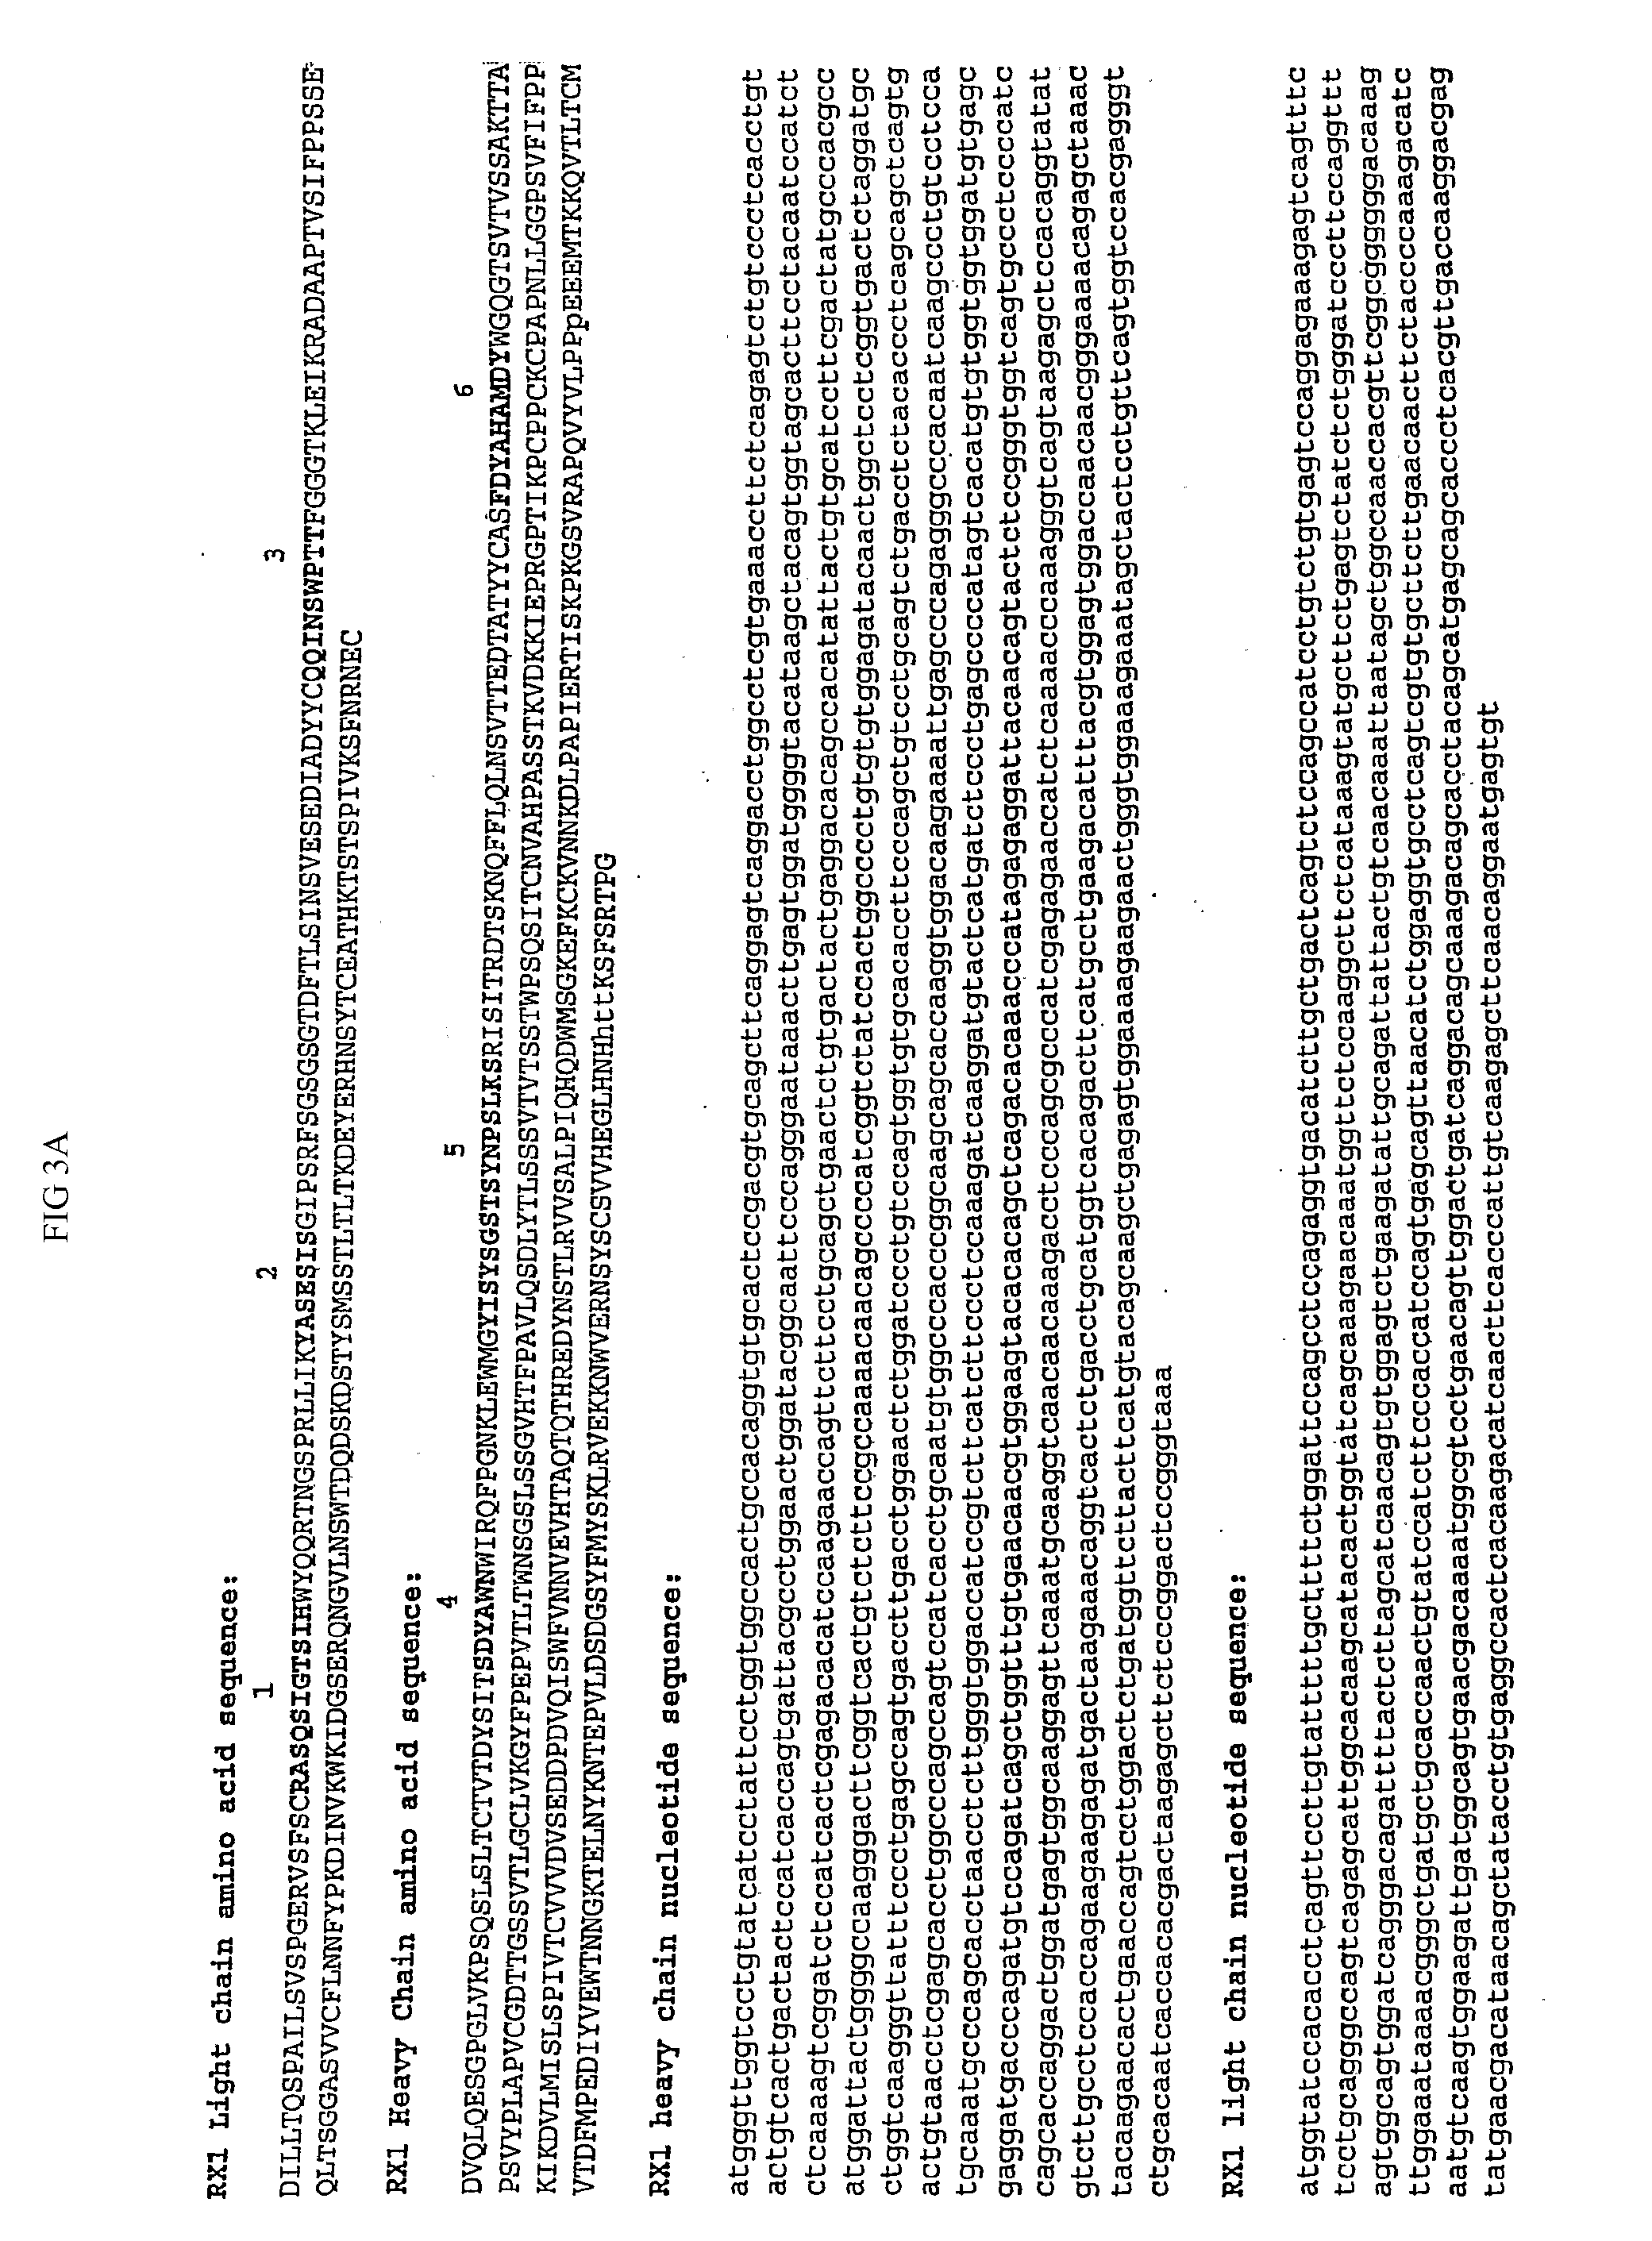 Soluble human m-csf receptor and uses thereof